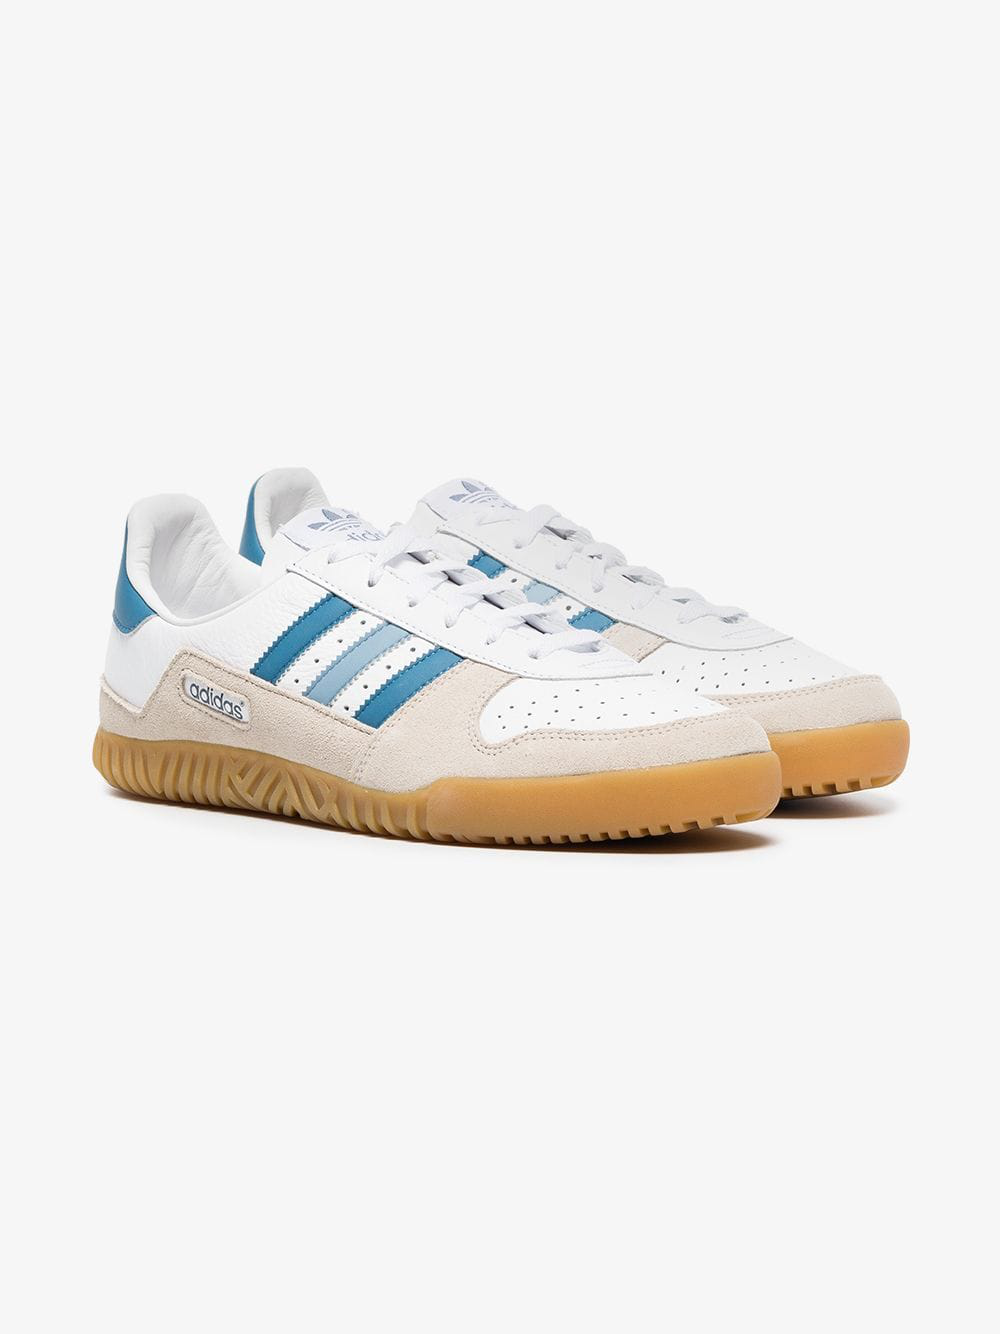 Adidas Originals Adidas White, Blue And Grey Indoor Comp Spzl Leather  Sneakers | ModeSens